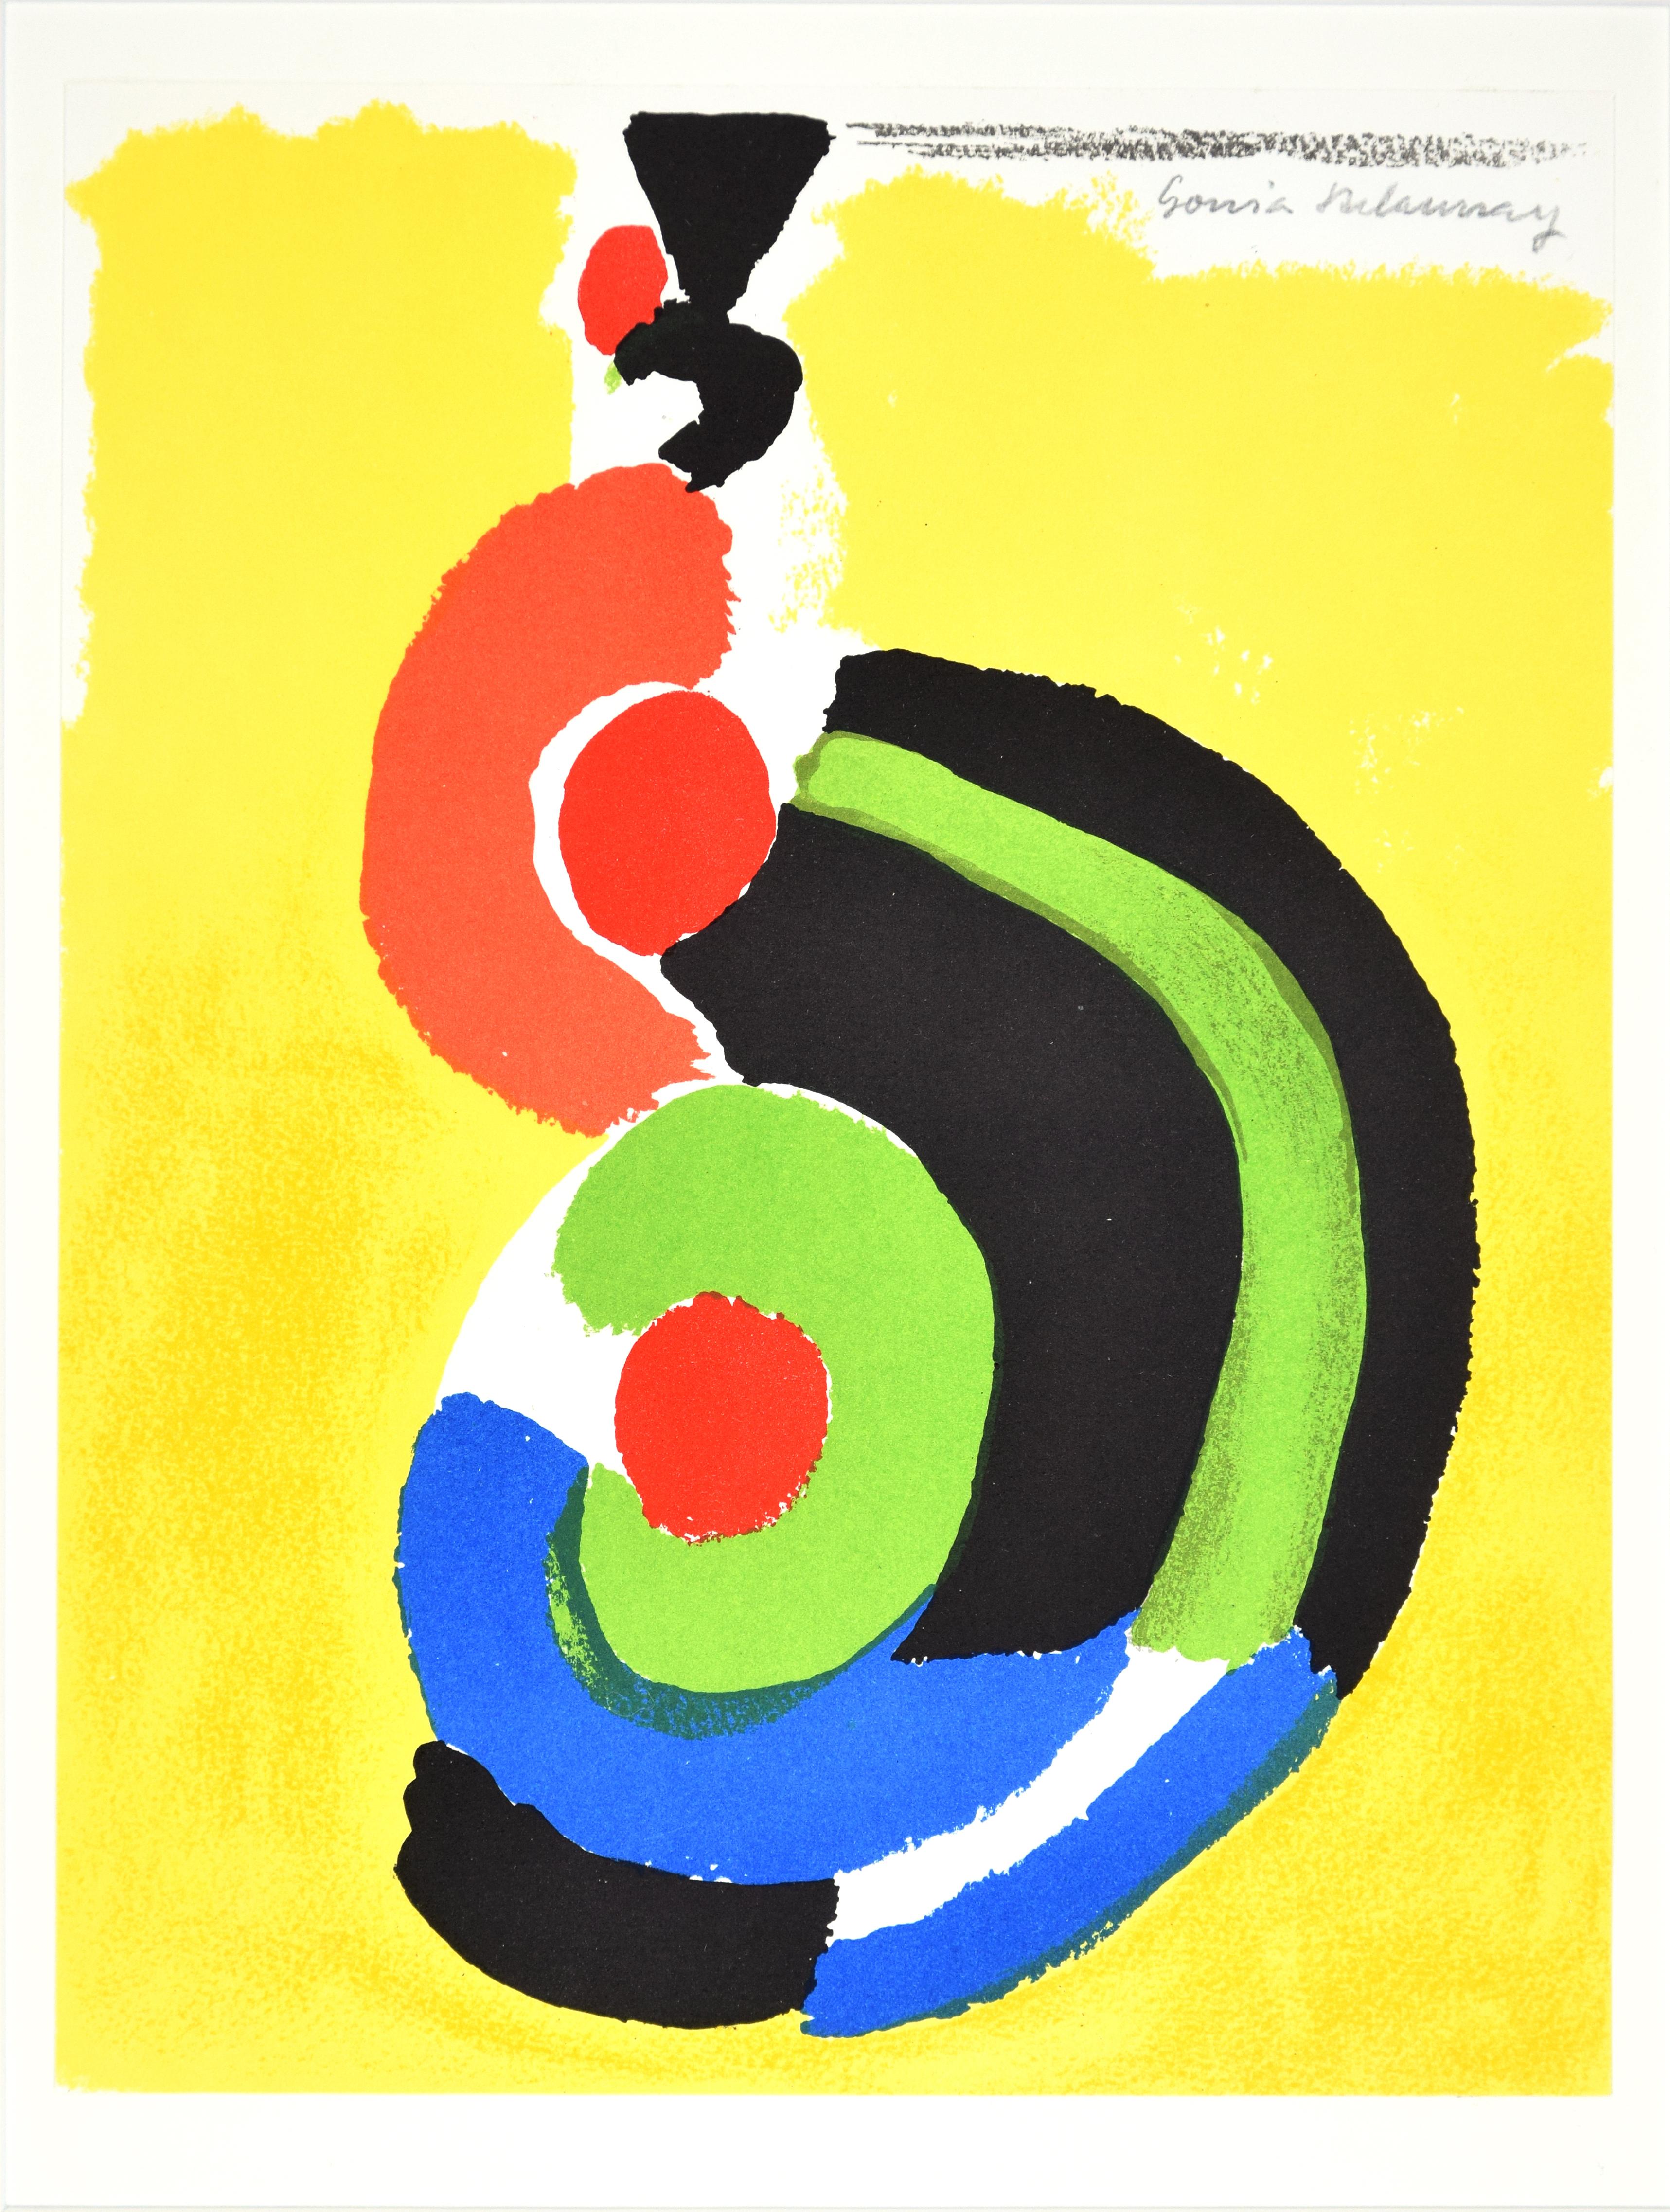 Contraste de Formes is a beautiful colored lithograph on paper, realized in 1969 by the artist, Sonia Delaunay. Not numbered but signed on top right in pencil.

An amazing and colorful abstract composition, printed by Mourlot. 

In excellent